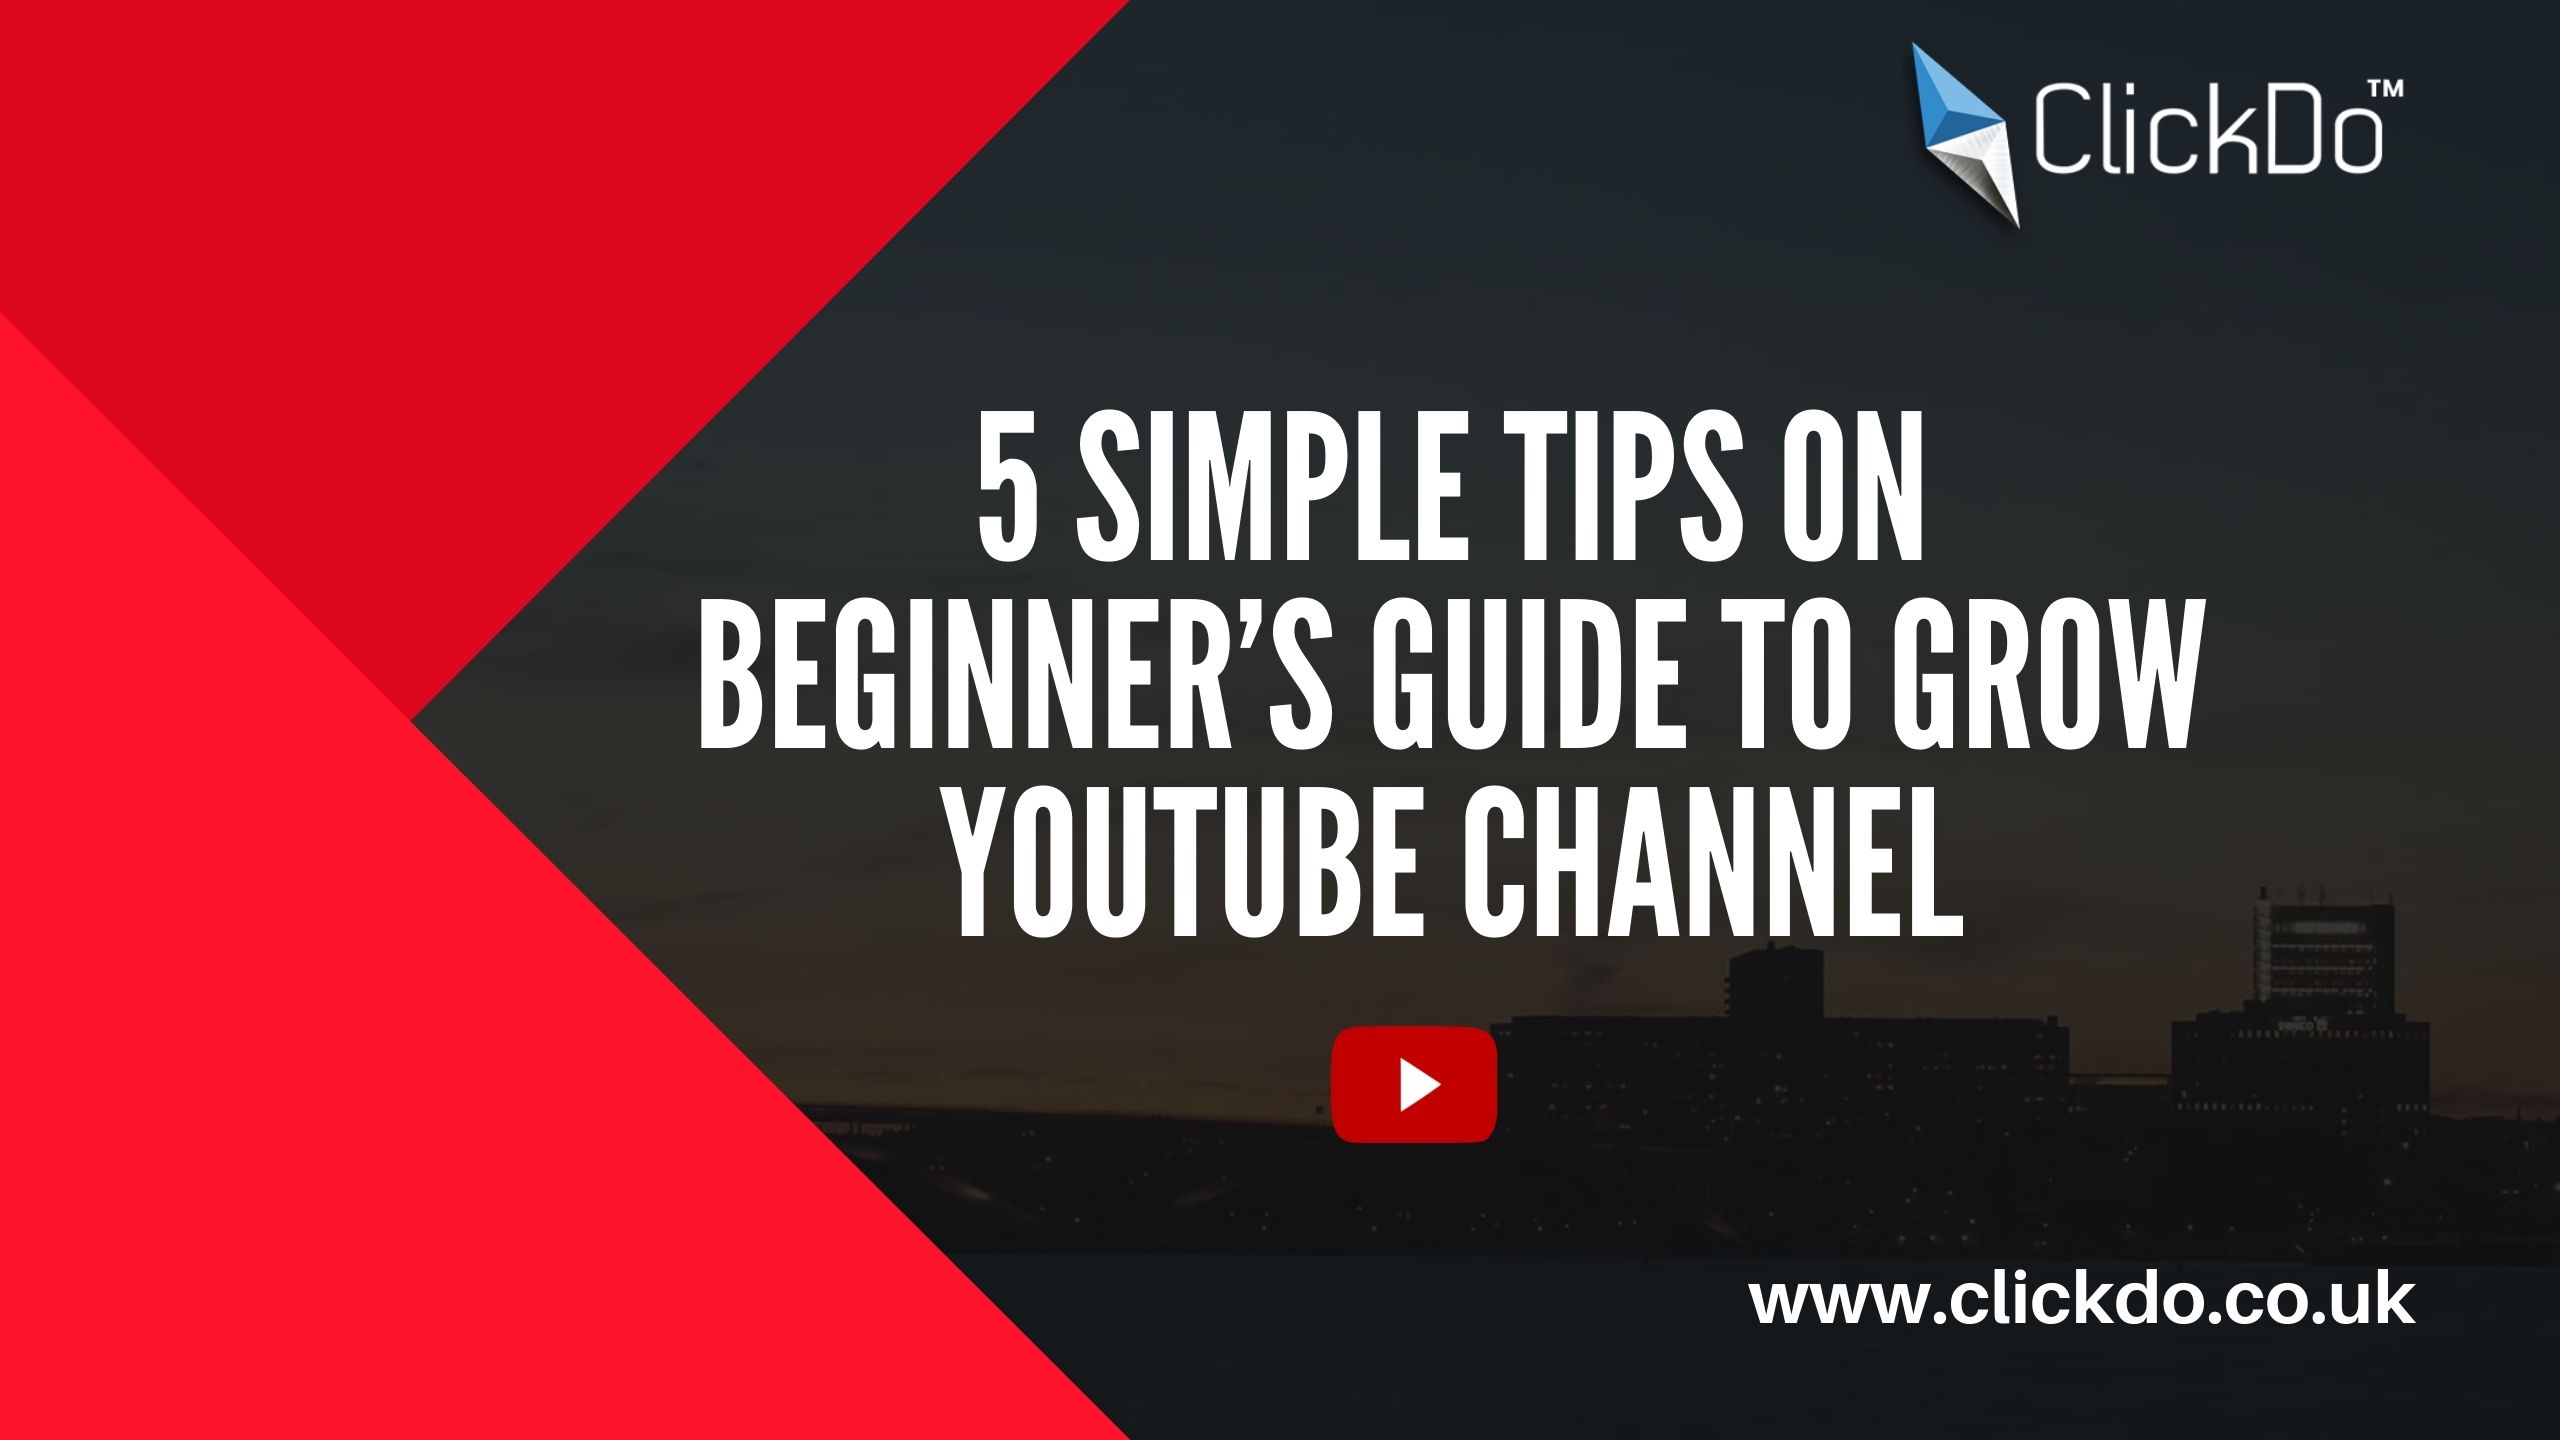 5 simple tips on Beginner’s Guide to grow YouTube channel